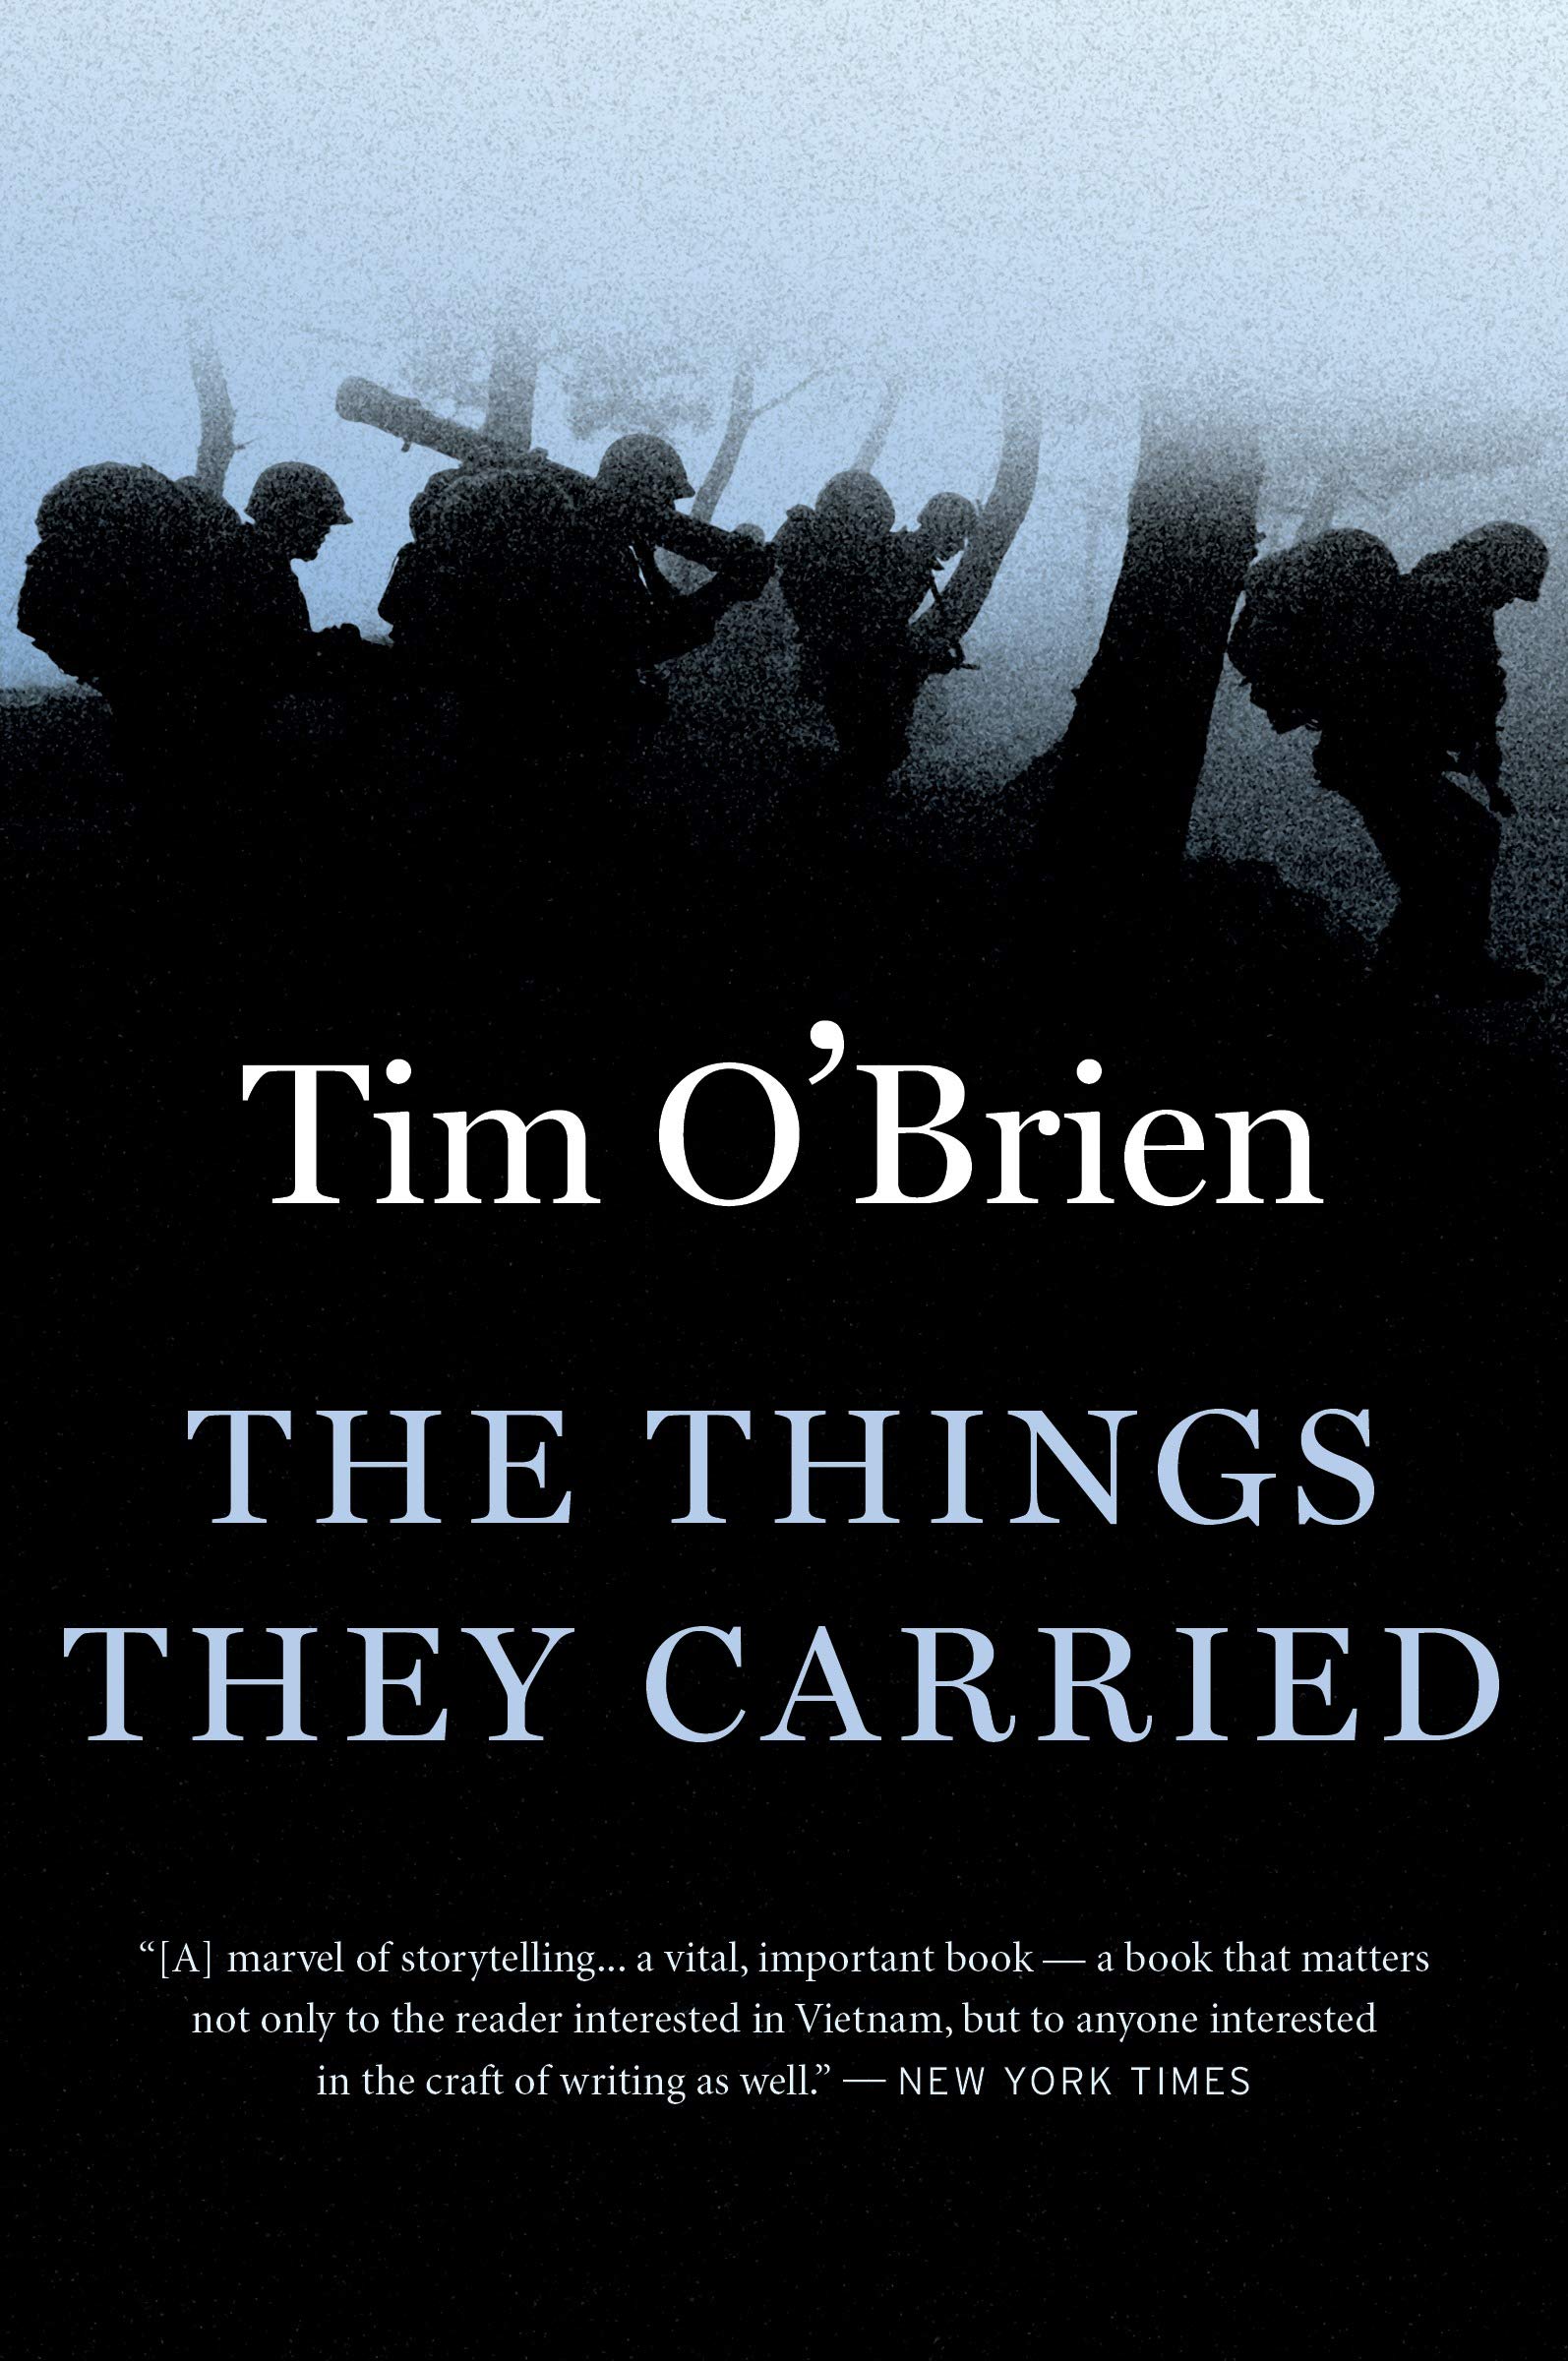 'The Things They Carried' by Tim O’Brien